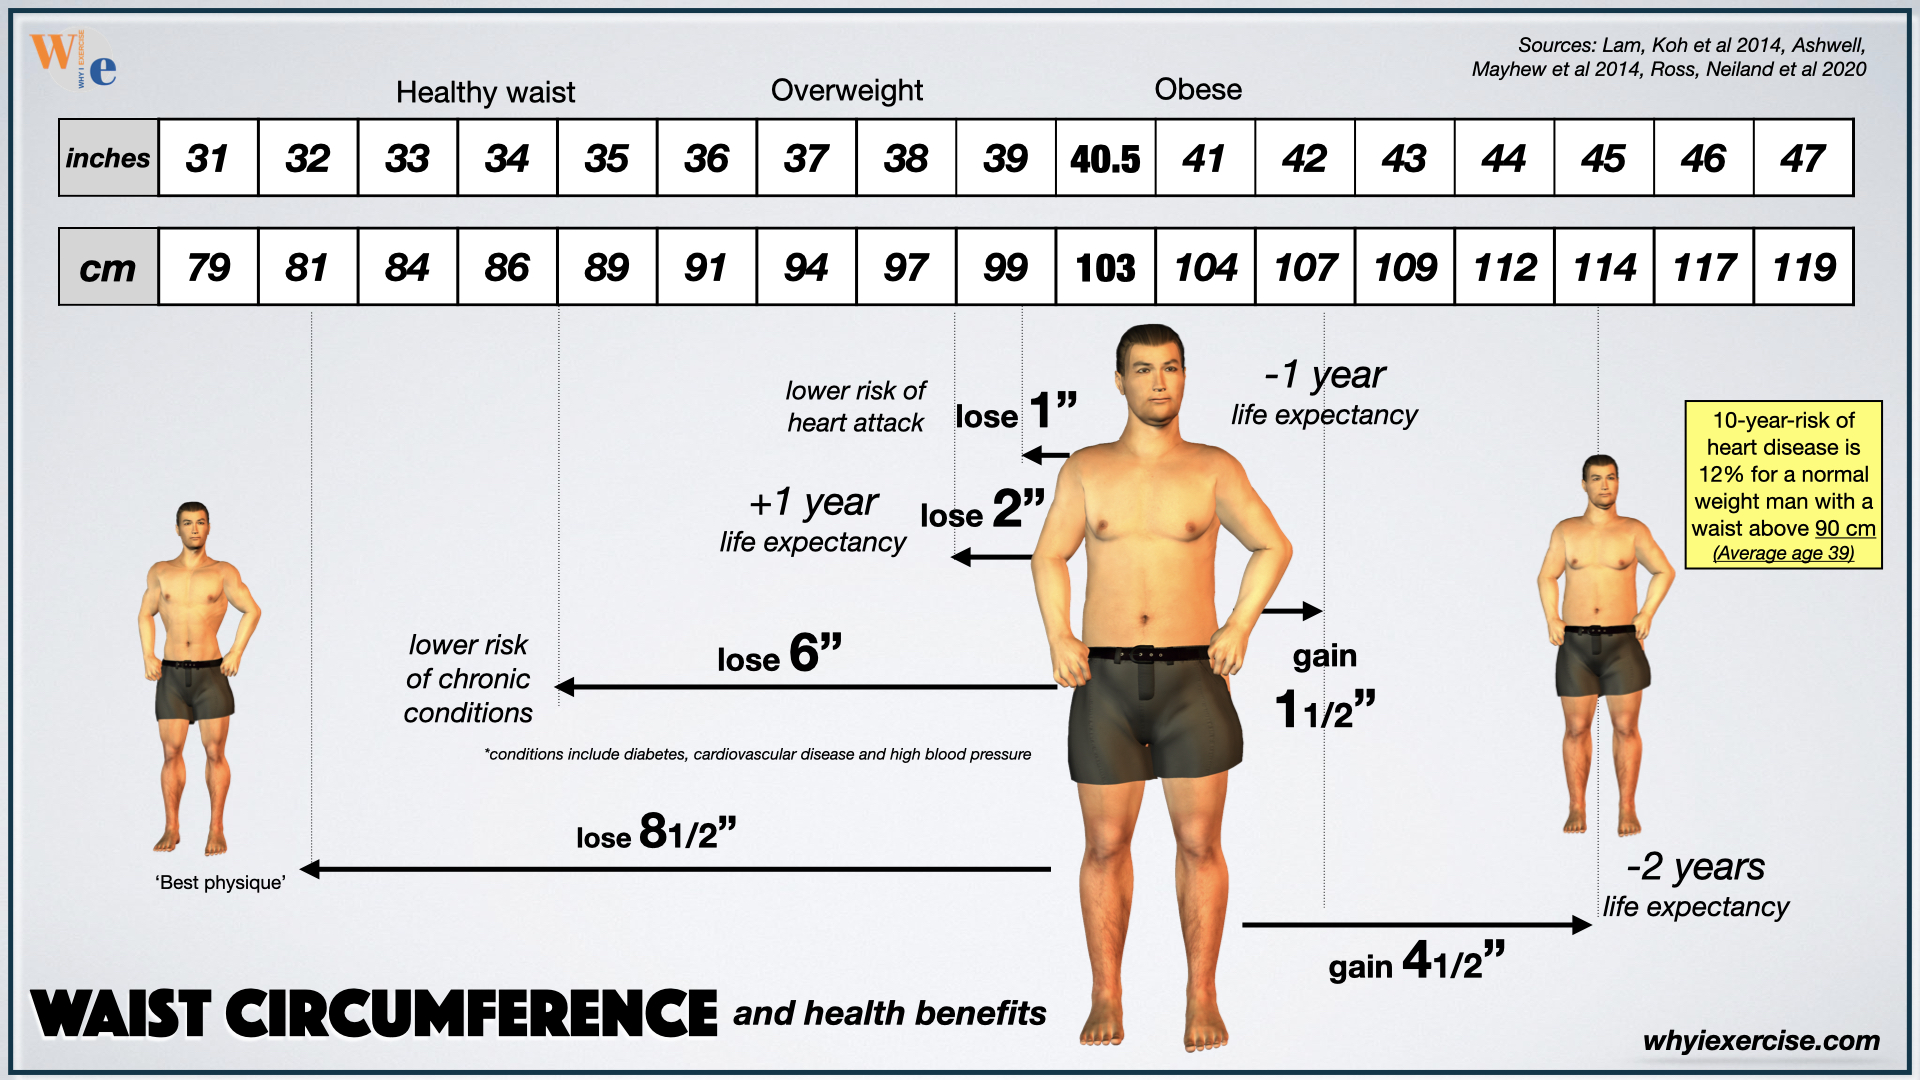 Waist circumference and health benefits for men 